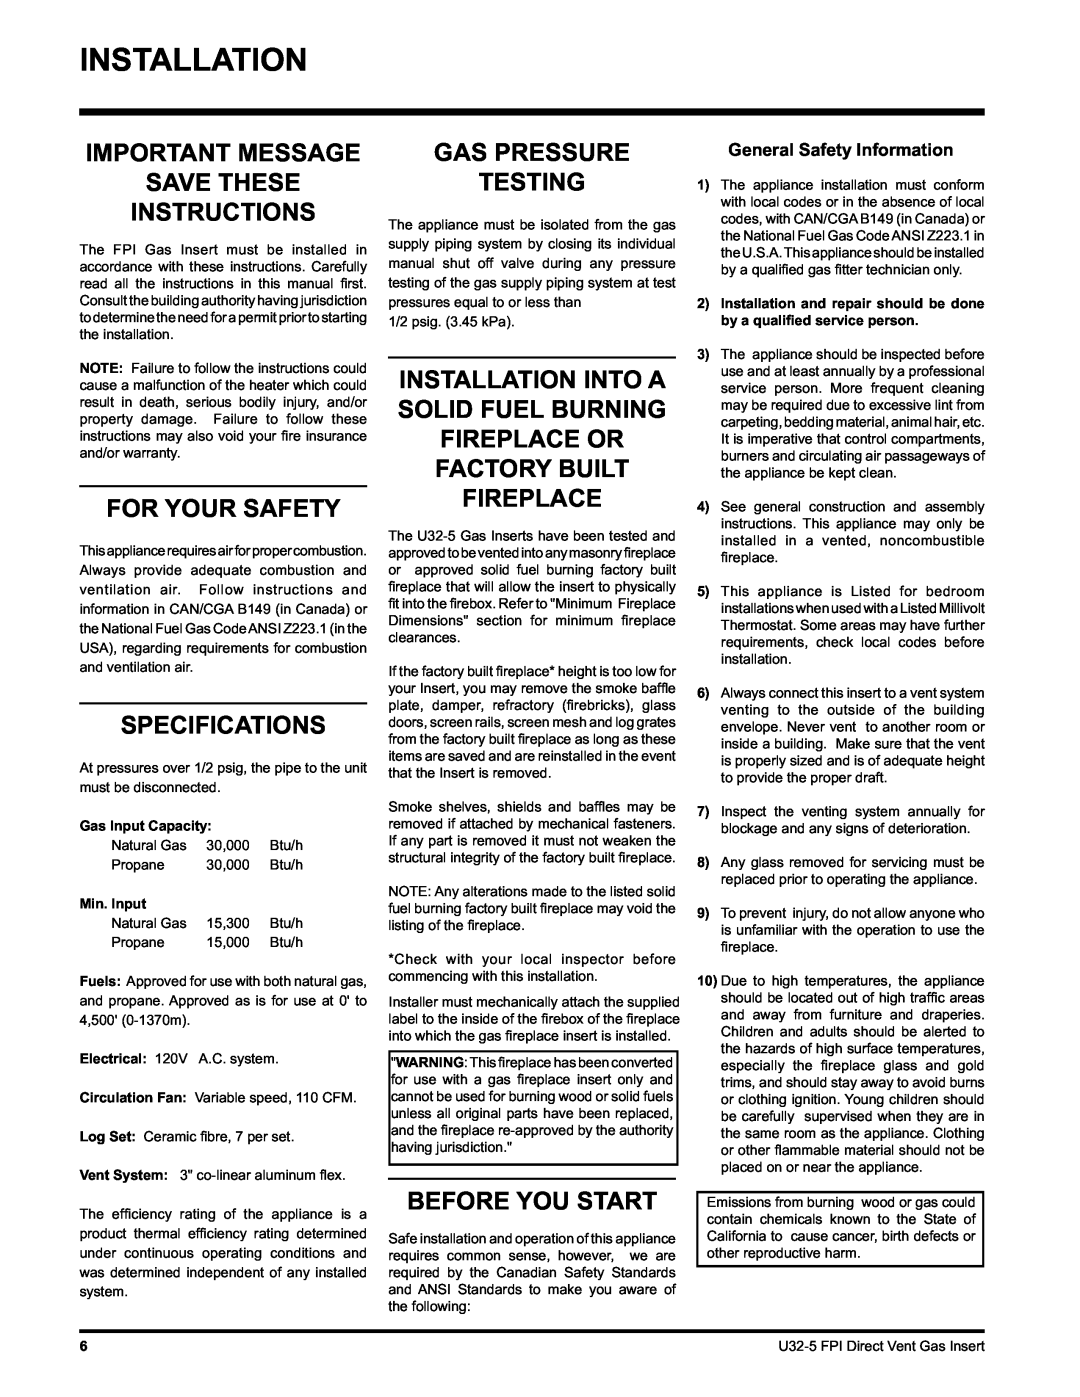 Hampton Direct U32 Installation, Important Message Save These Instructions, For Your Safety, Specifications, Min. Input 